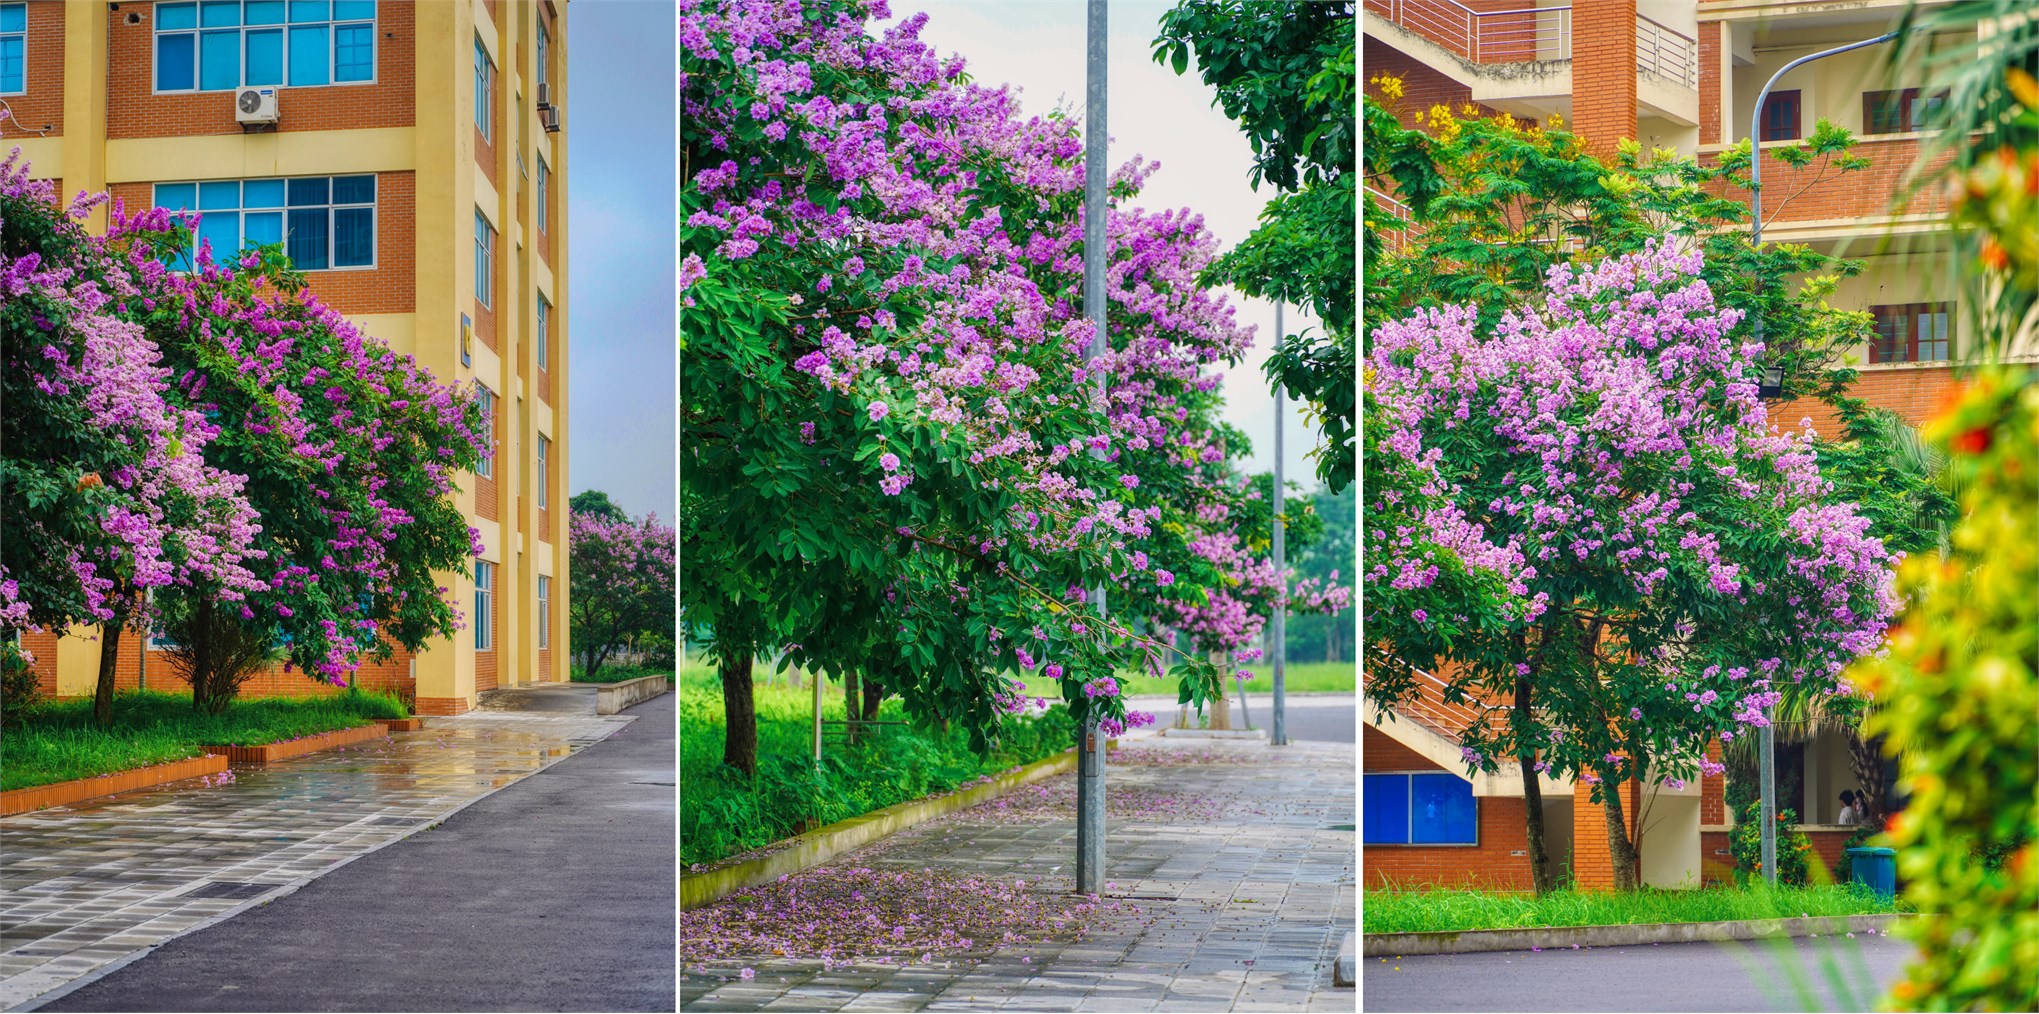 The campus of Hanoi University of Industry bursts into a riot of color as vibrant flowers adorn its pathways and green spaces